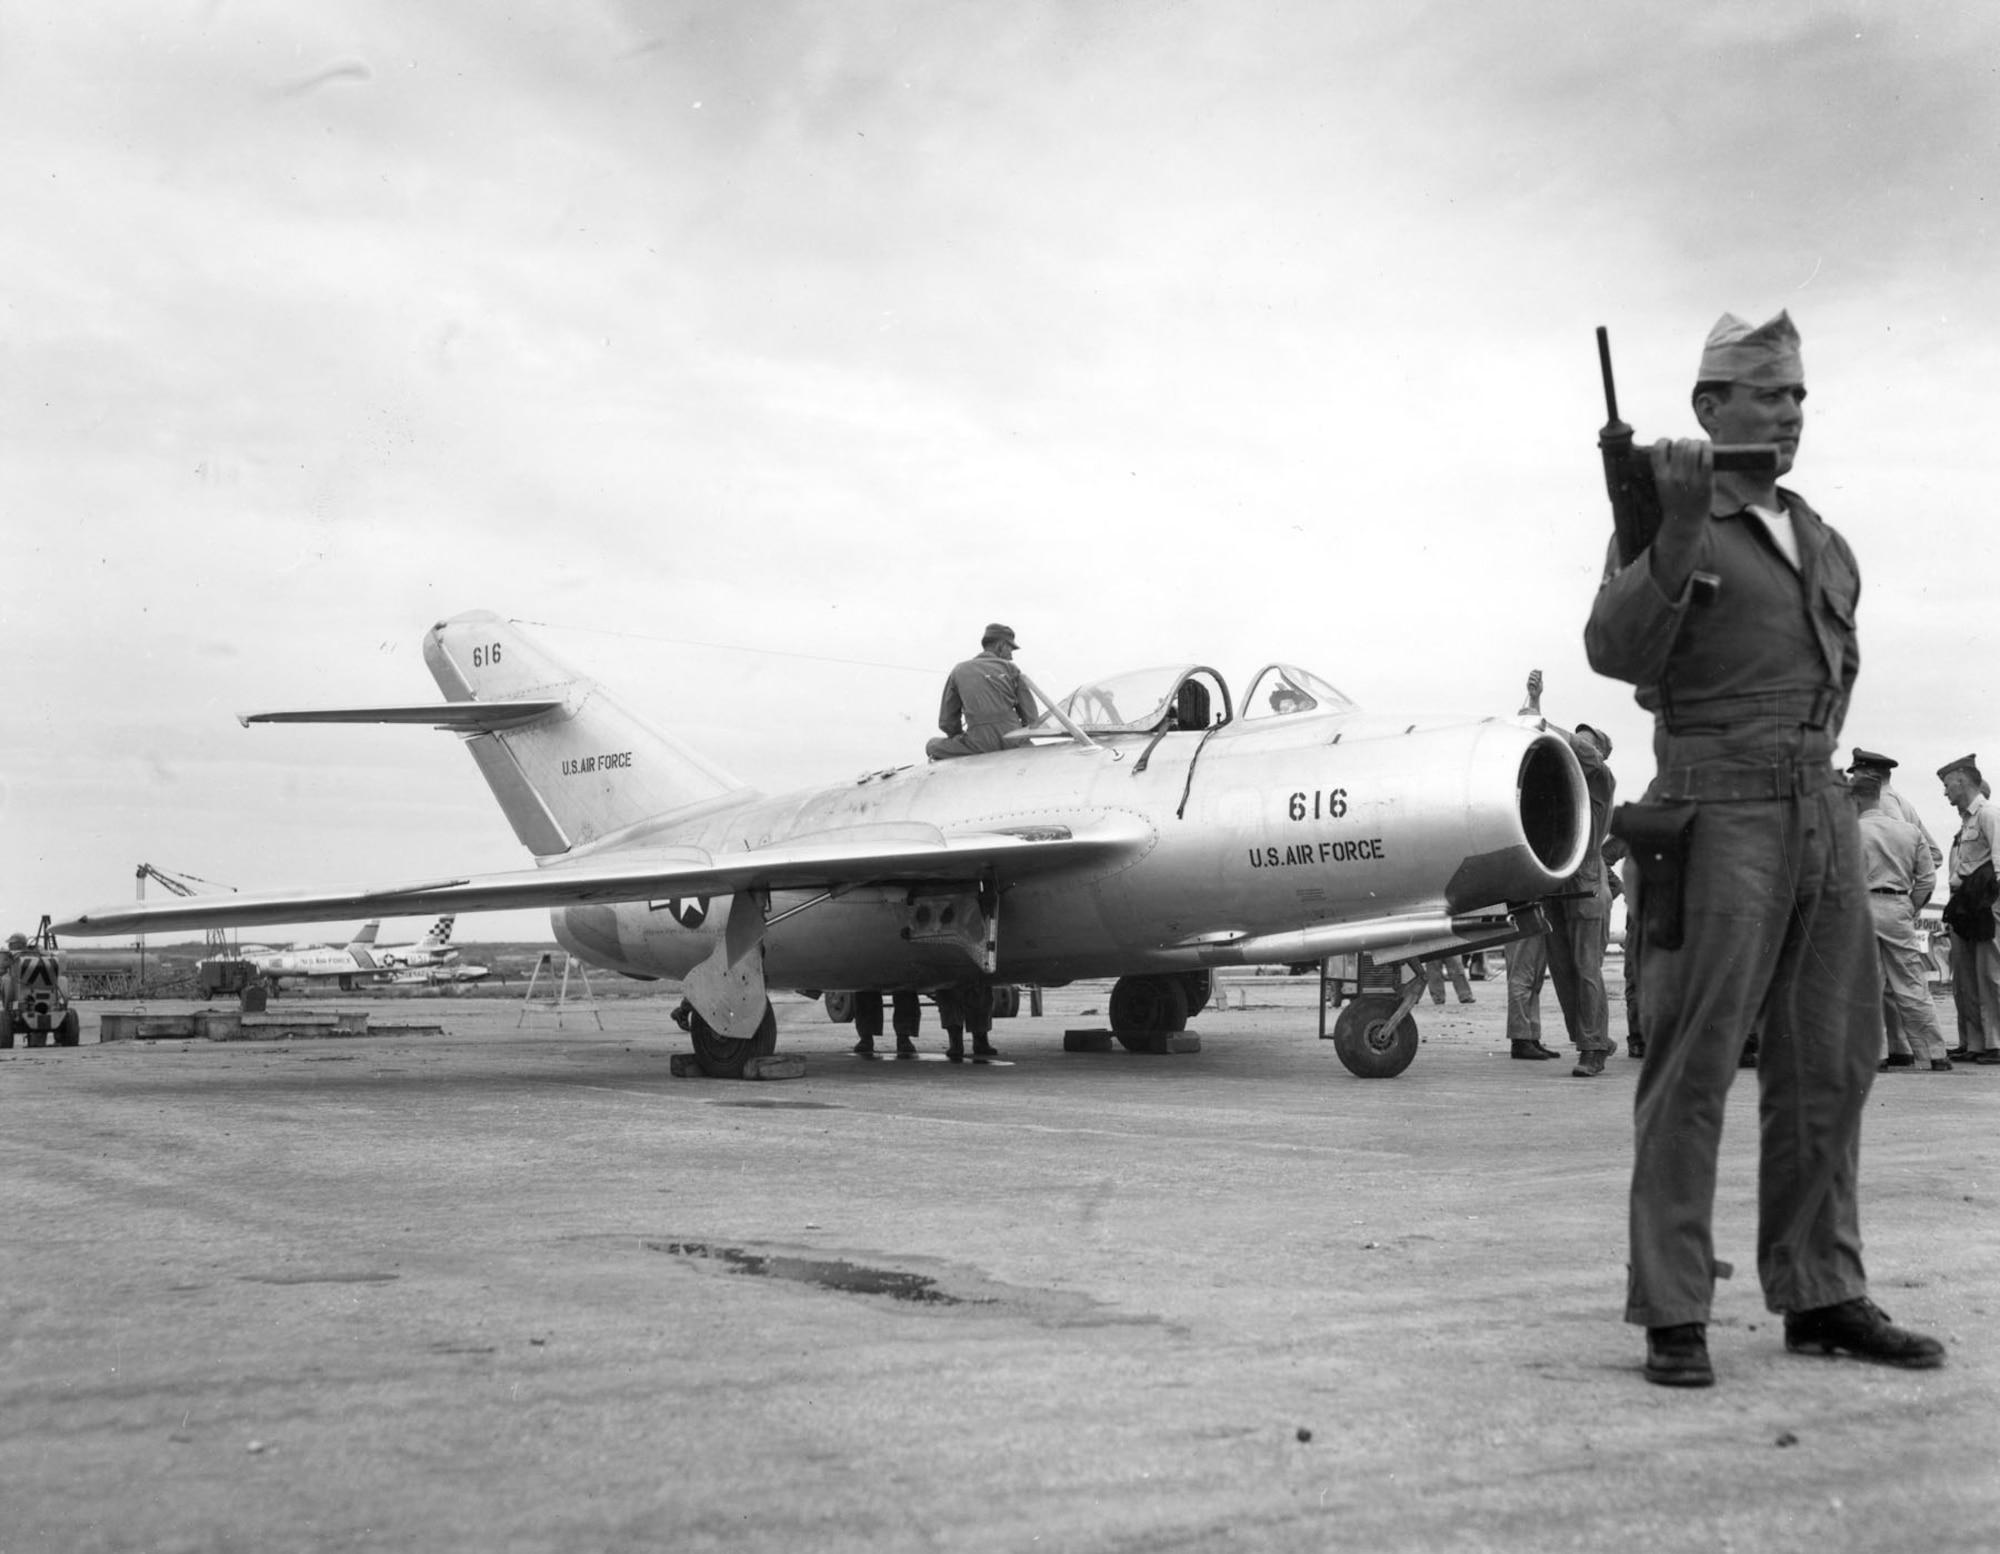 Repainted in USAF markings and insignia, the MiG-15bis under guard and awaiting flight-testing at Okinawa. (U.S. Air Force photo)